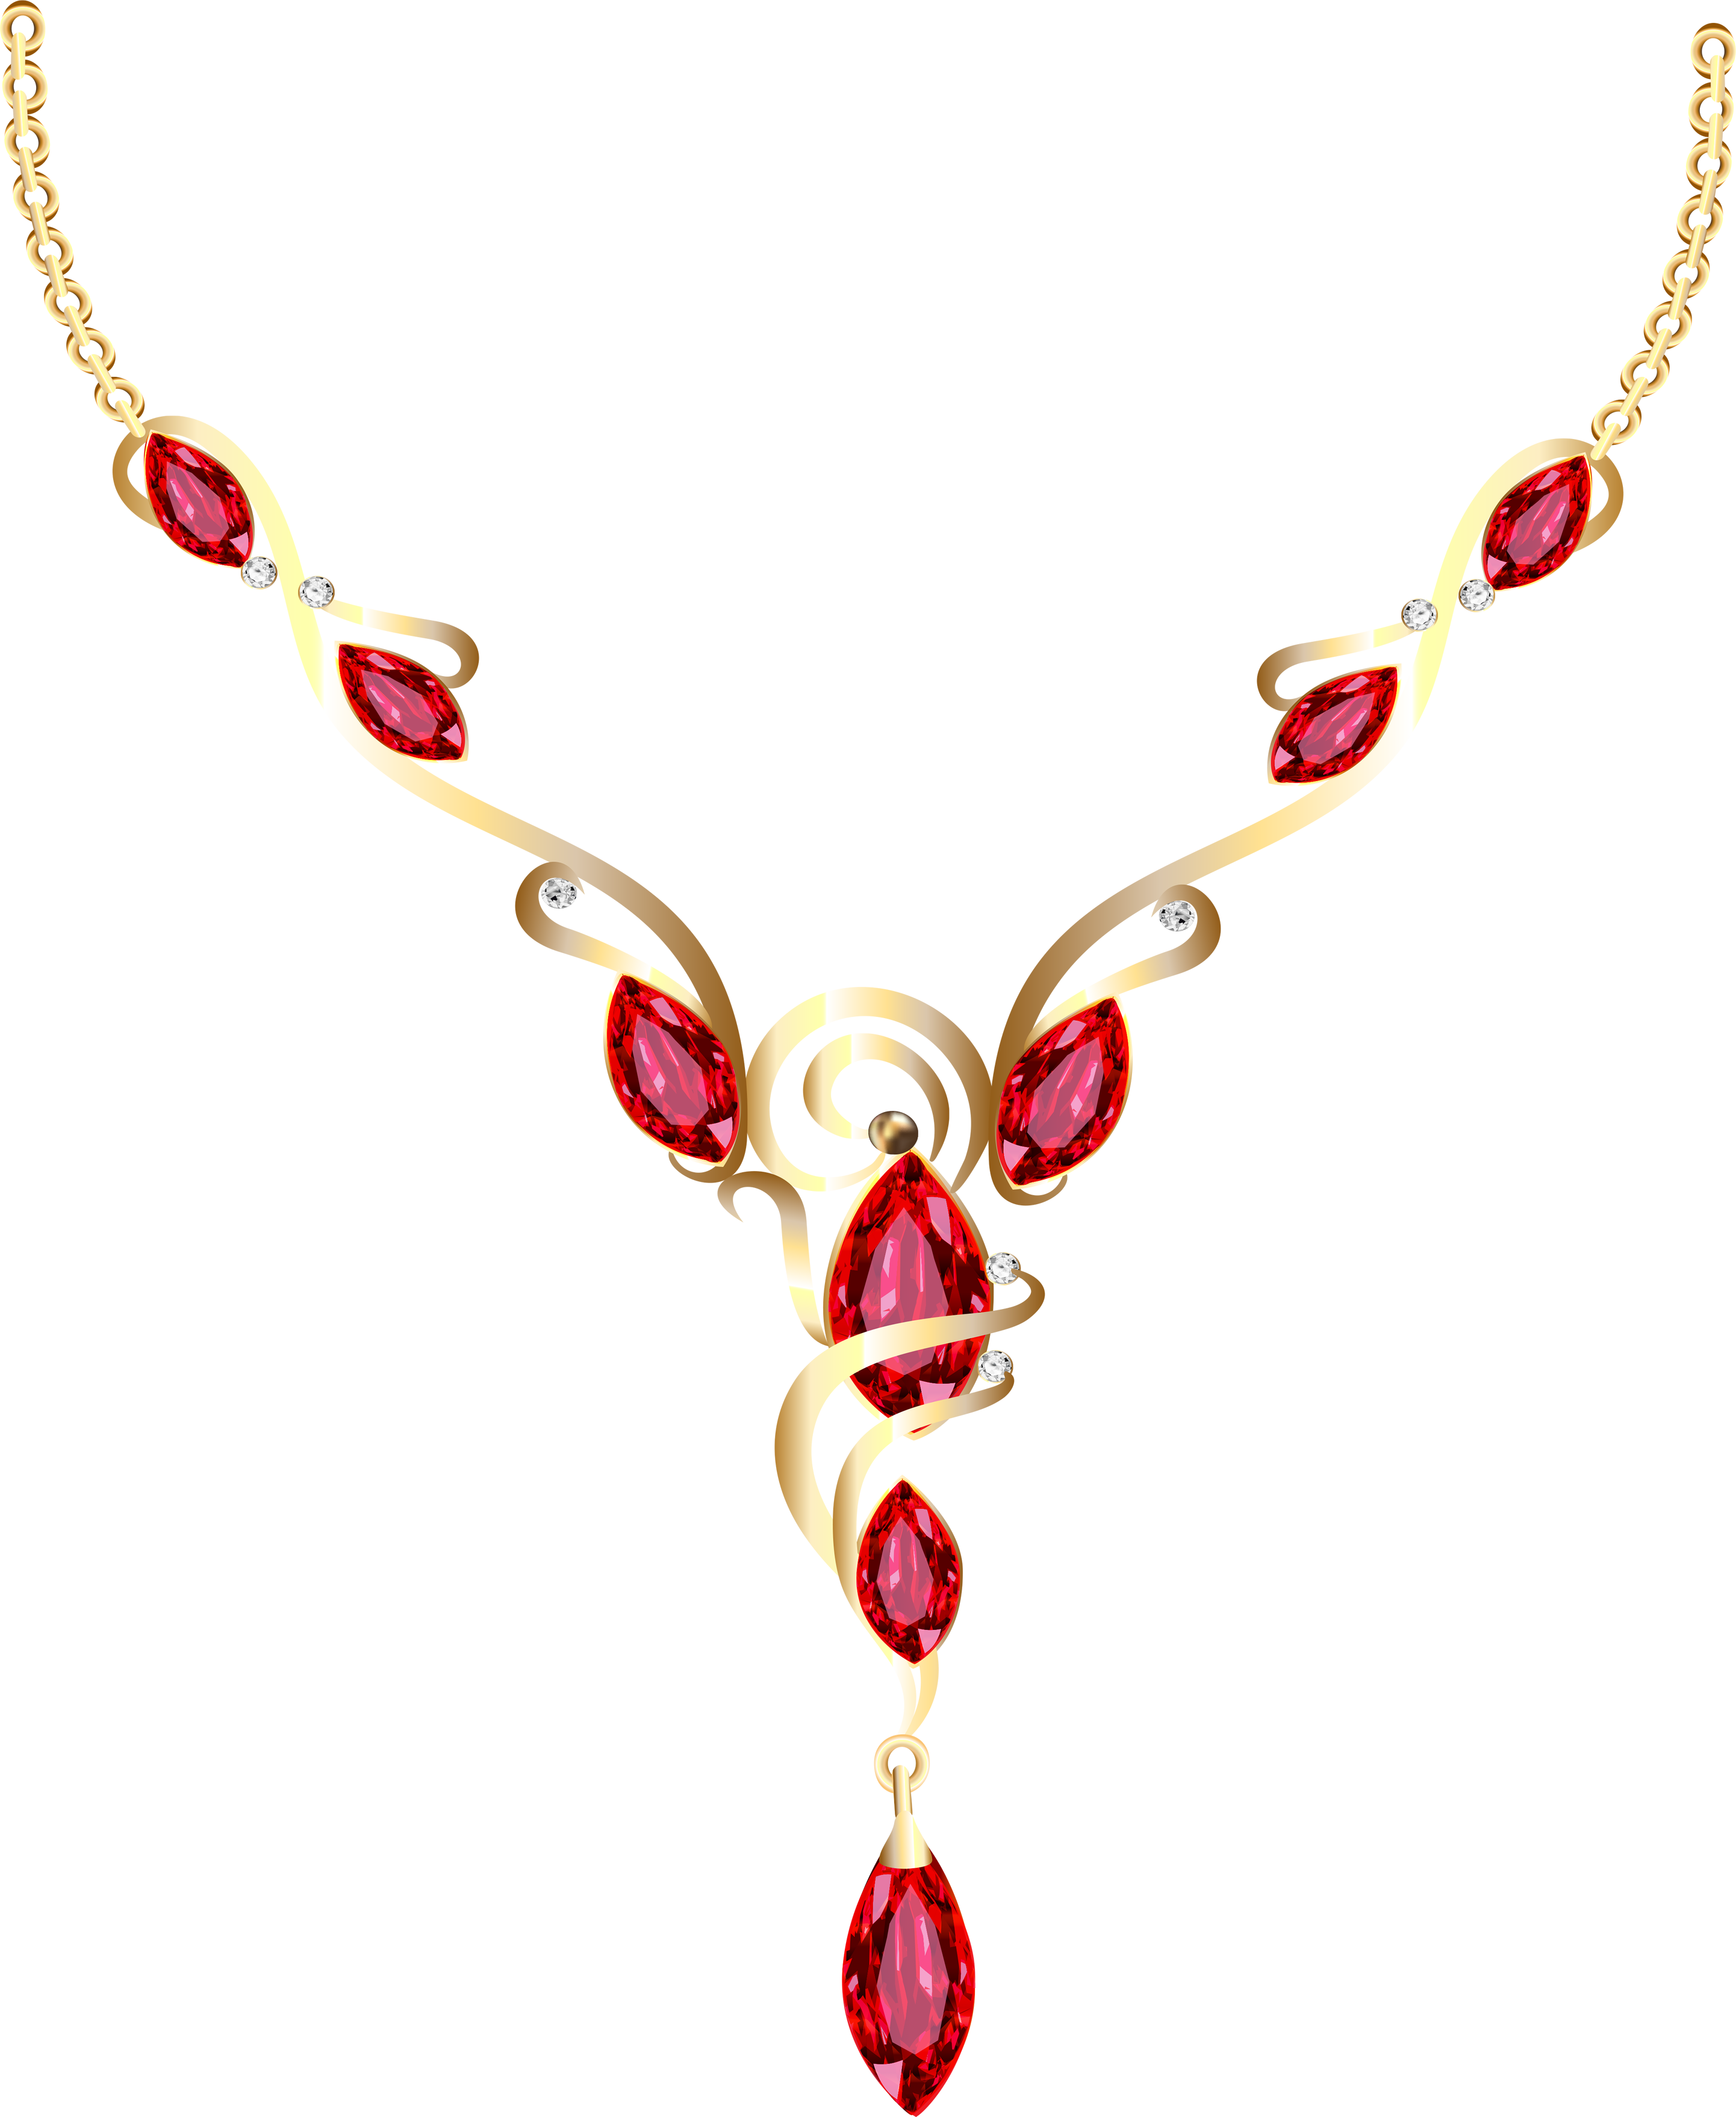 Jewellery Free Transparent Image HQ PNG Image